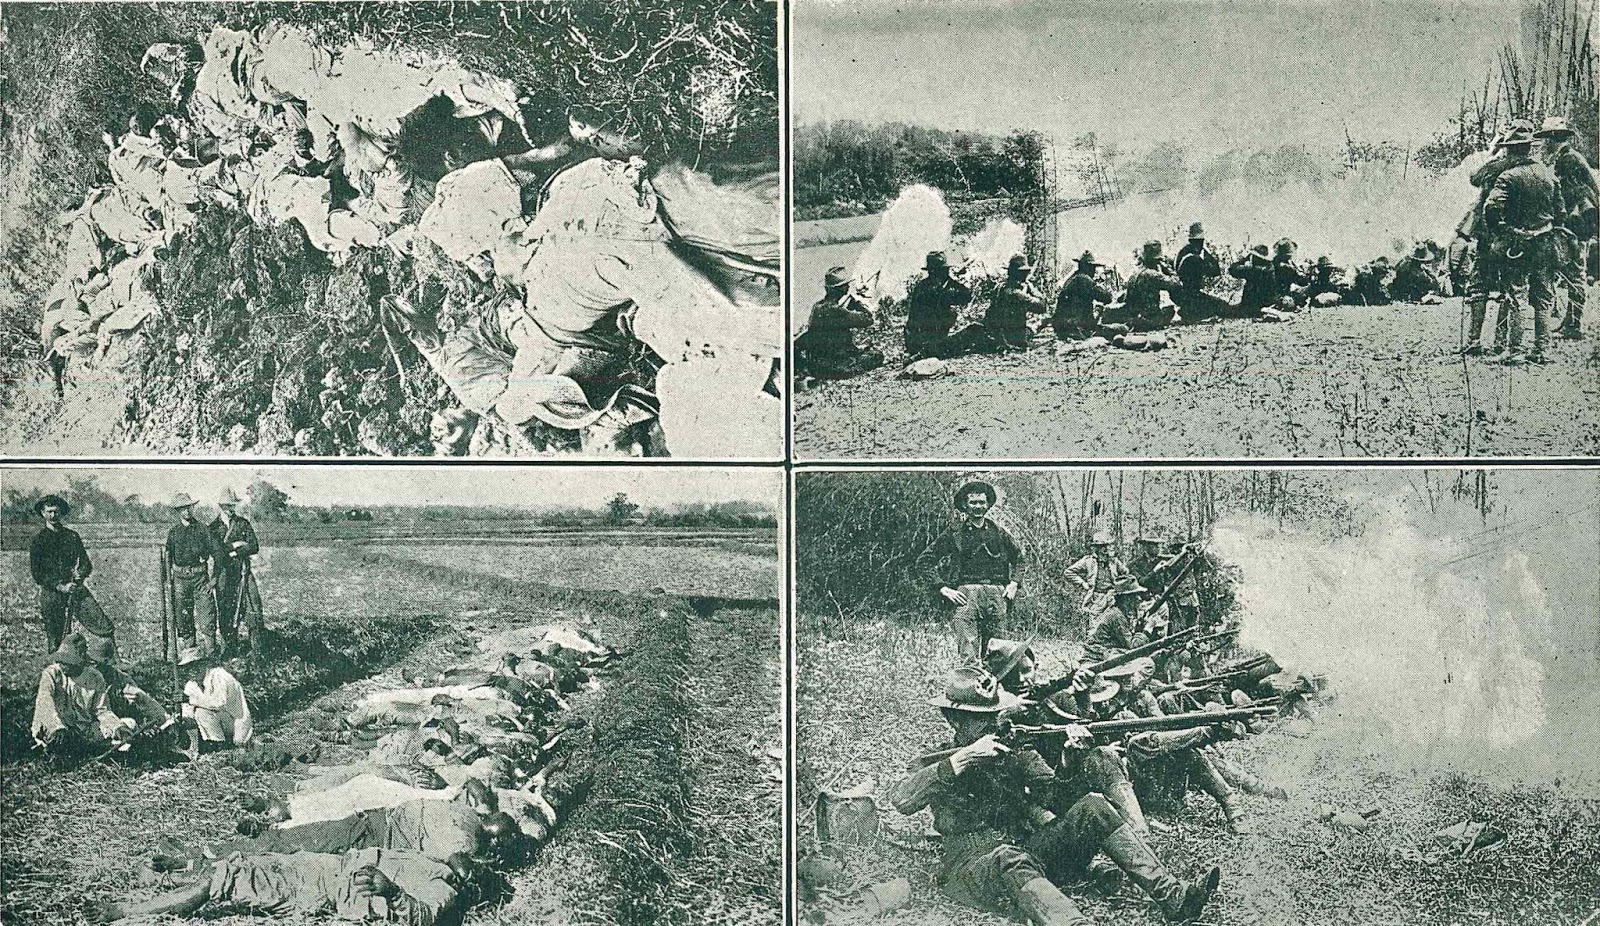 Earth No War Ngo Enwn The American Army Fired A Mass Fire On The Moro Rebellion Around April 1903 And Many Moro Corpses Were Scattered On The Ground